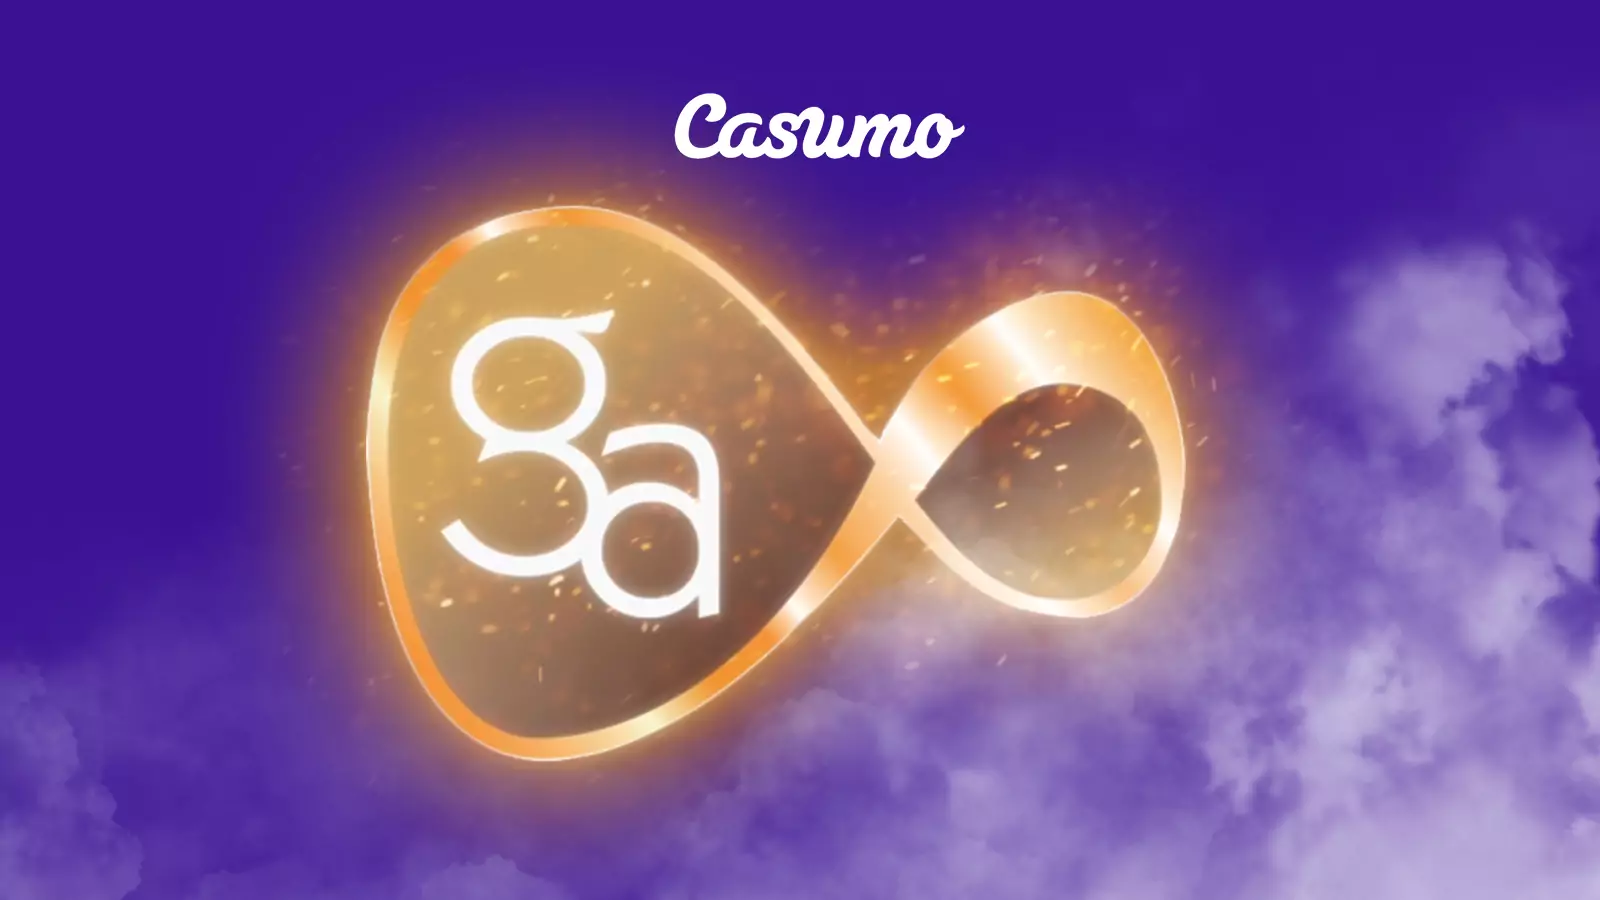 Casumo is one of the best online casinos that provides the best service for its players.